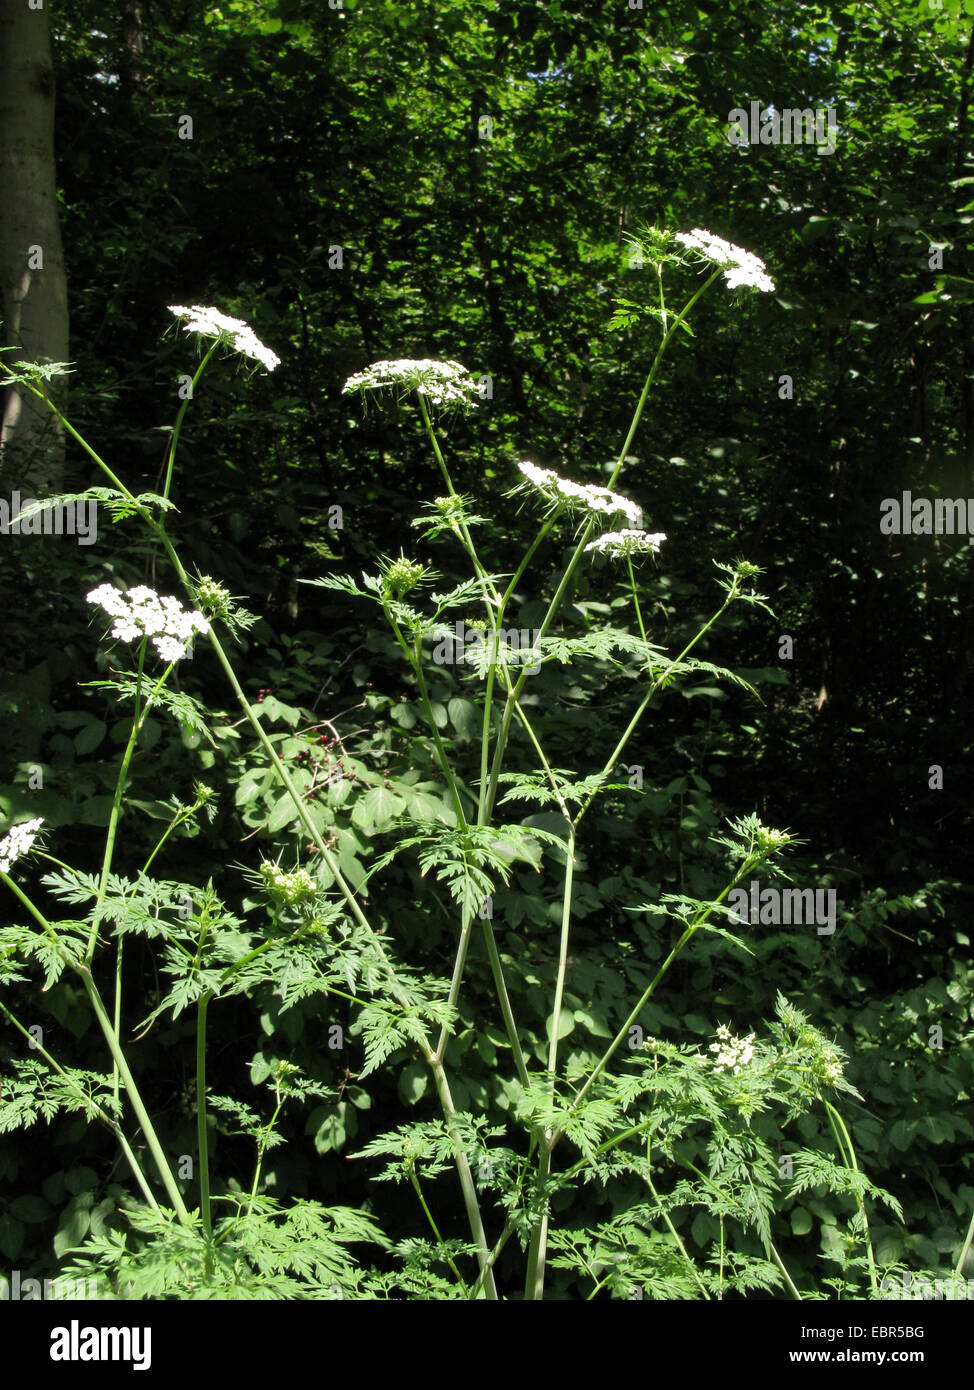 Fool's parsley, Fool's cicely, Poison parsley (Aethusa cynapiioides, Aethusa cynapium ssp. elata), blooming, Germany, Baden-Wuerttemberg Stock Photo